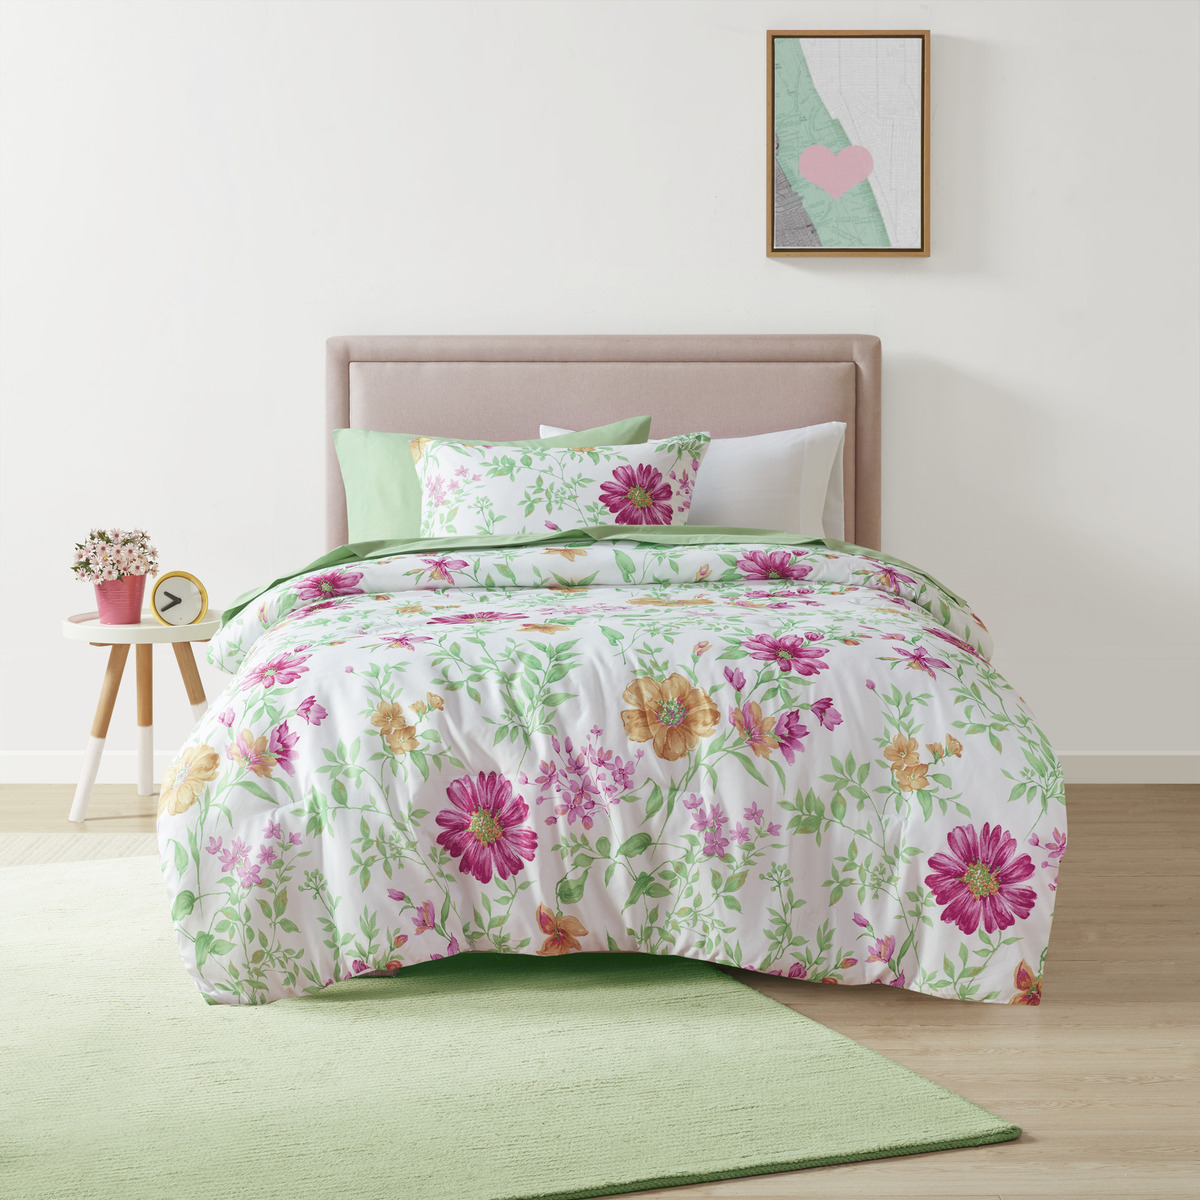 GUERANDE Pink and Green Floral Bedding (Queen)